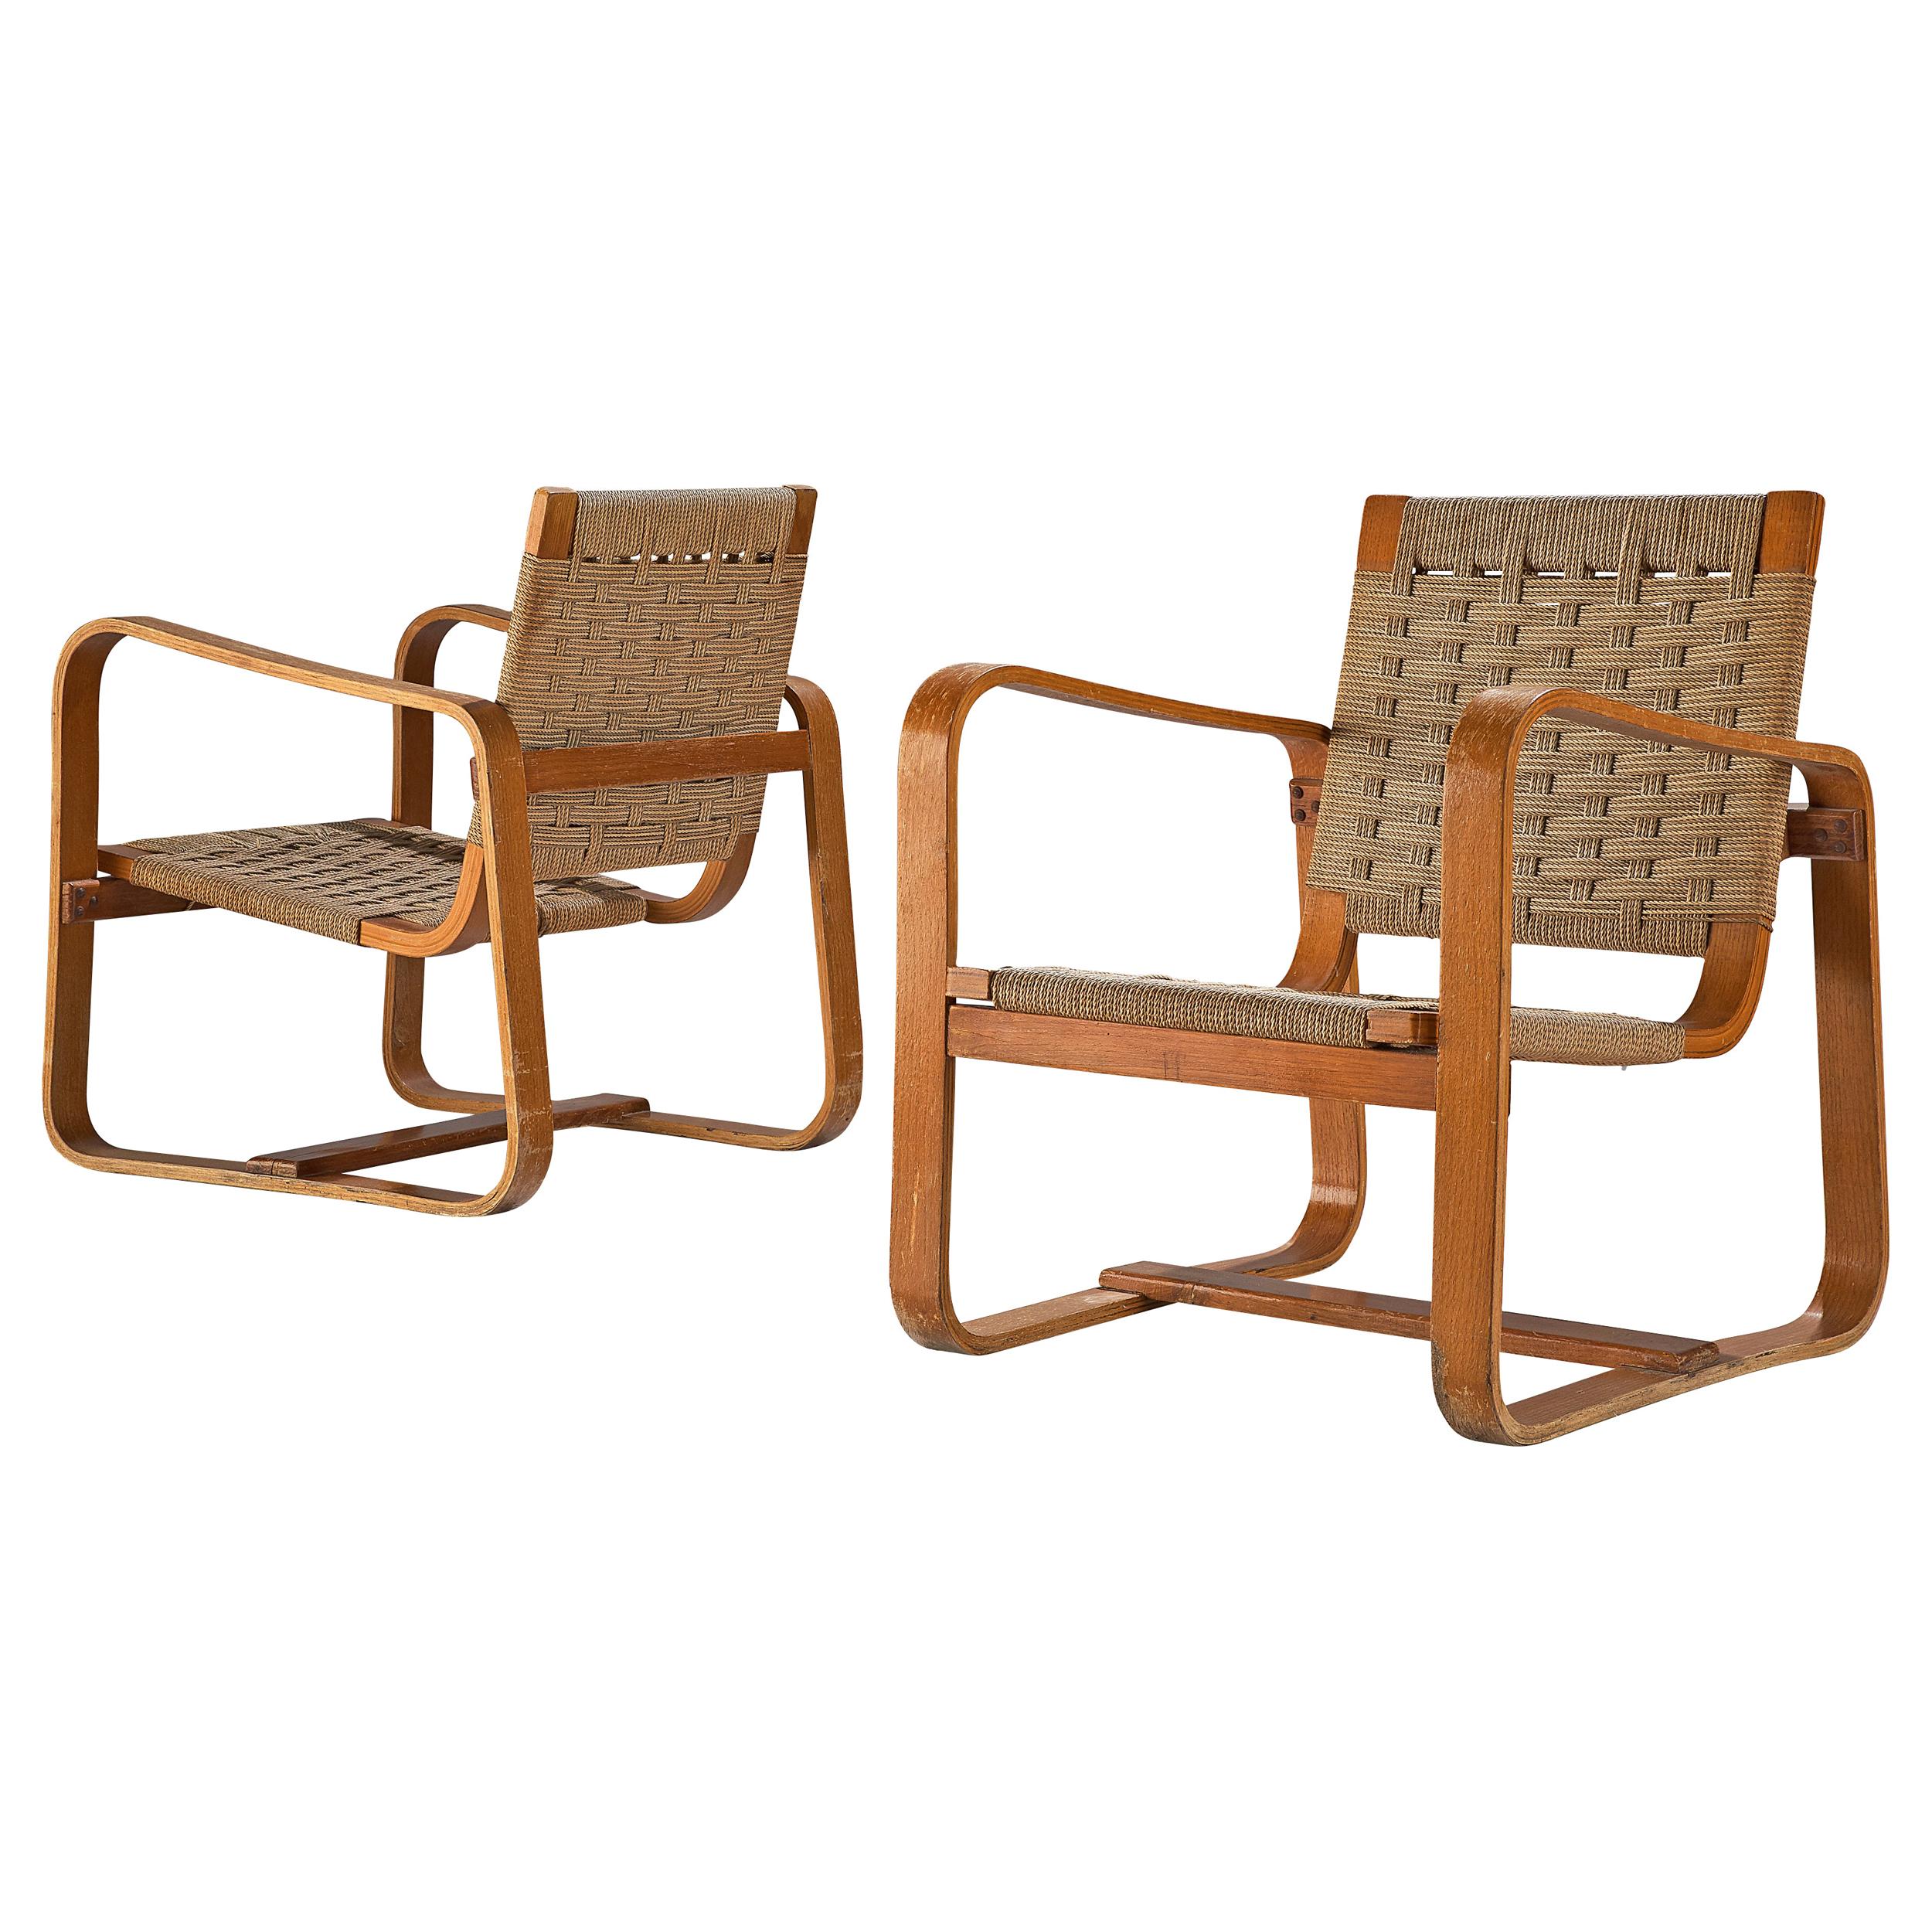 Giuseppe Pagano Pogatschnig Pair of Bentwood Lounge Chairs, 1940s